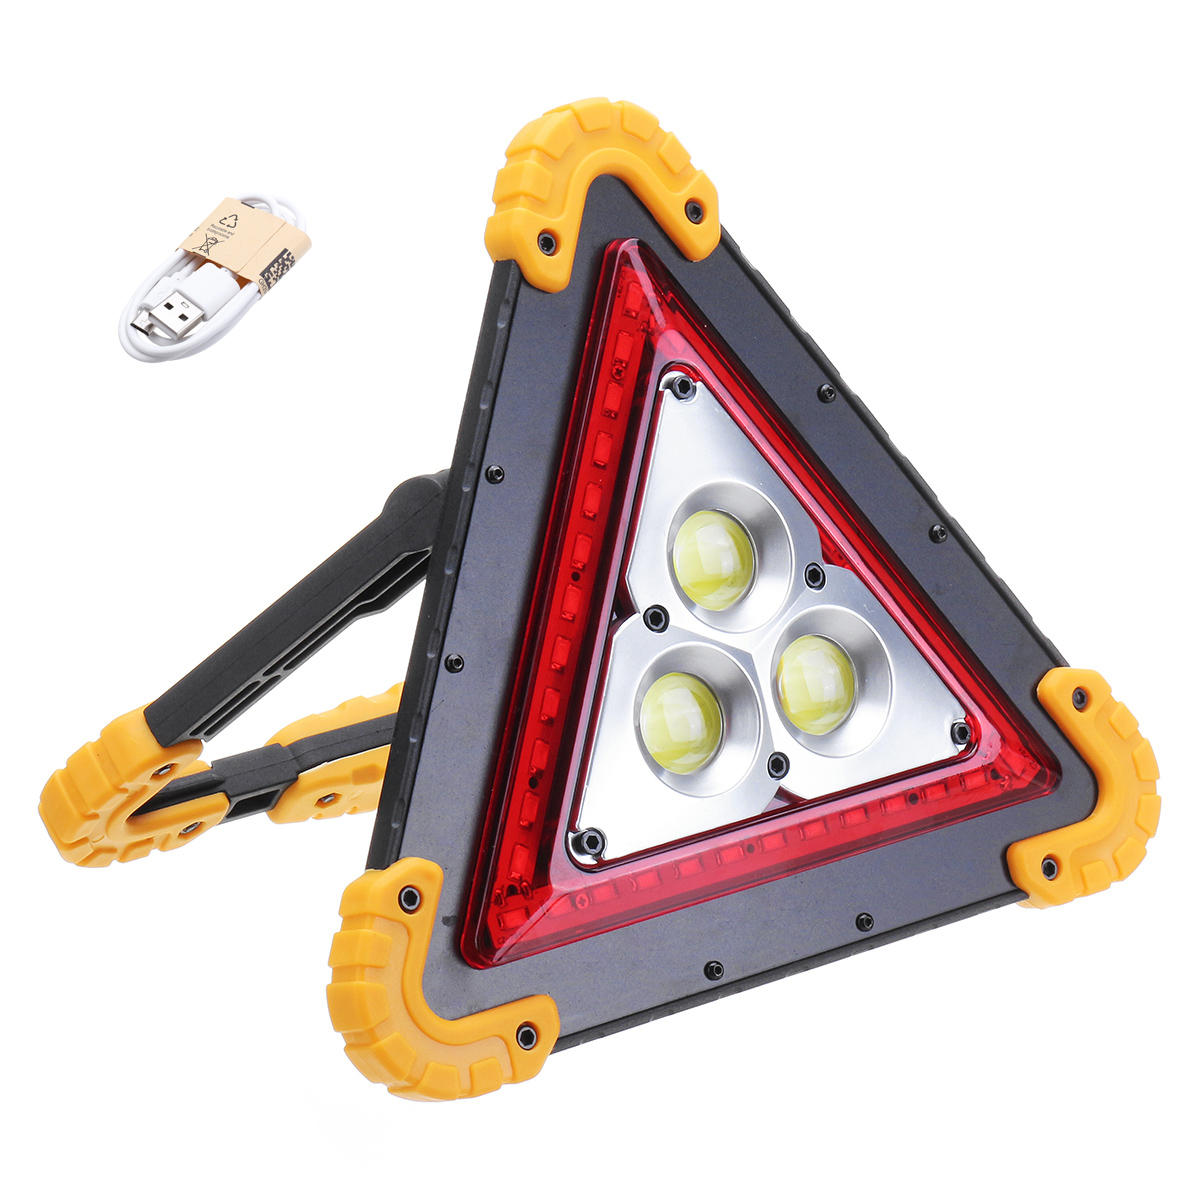 50W 36LED COB Work Light 4 Modes USB Rechargeable Outdoor Camping Lantern Tent Lamp